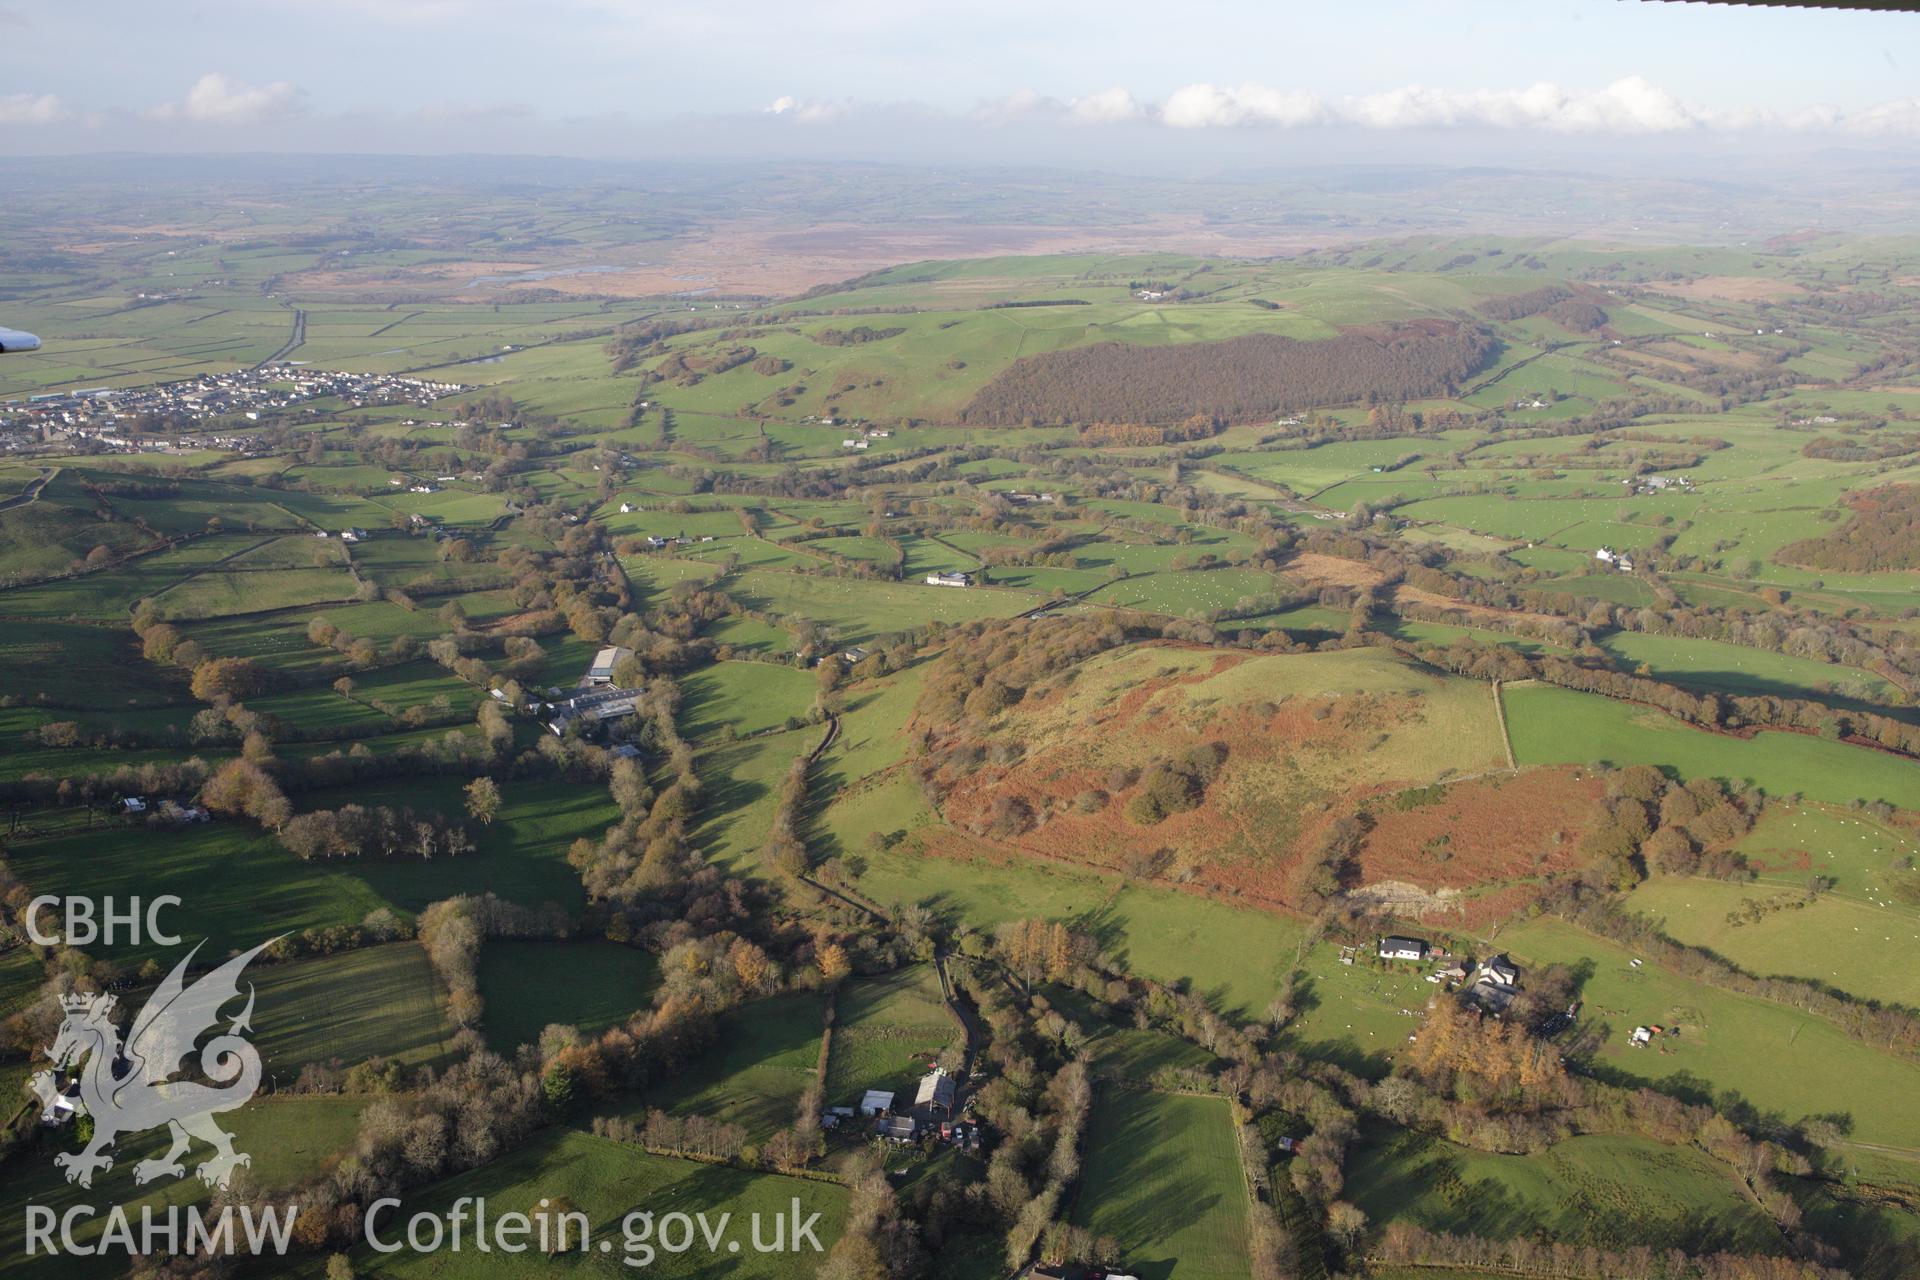 RCAHMW colour oblique aerial photograph of Tregaron and surrounding landscape from the south-east. Taken on 09 November 2009 by Toby Driver